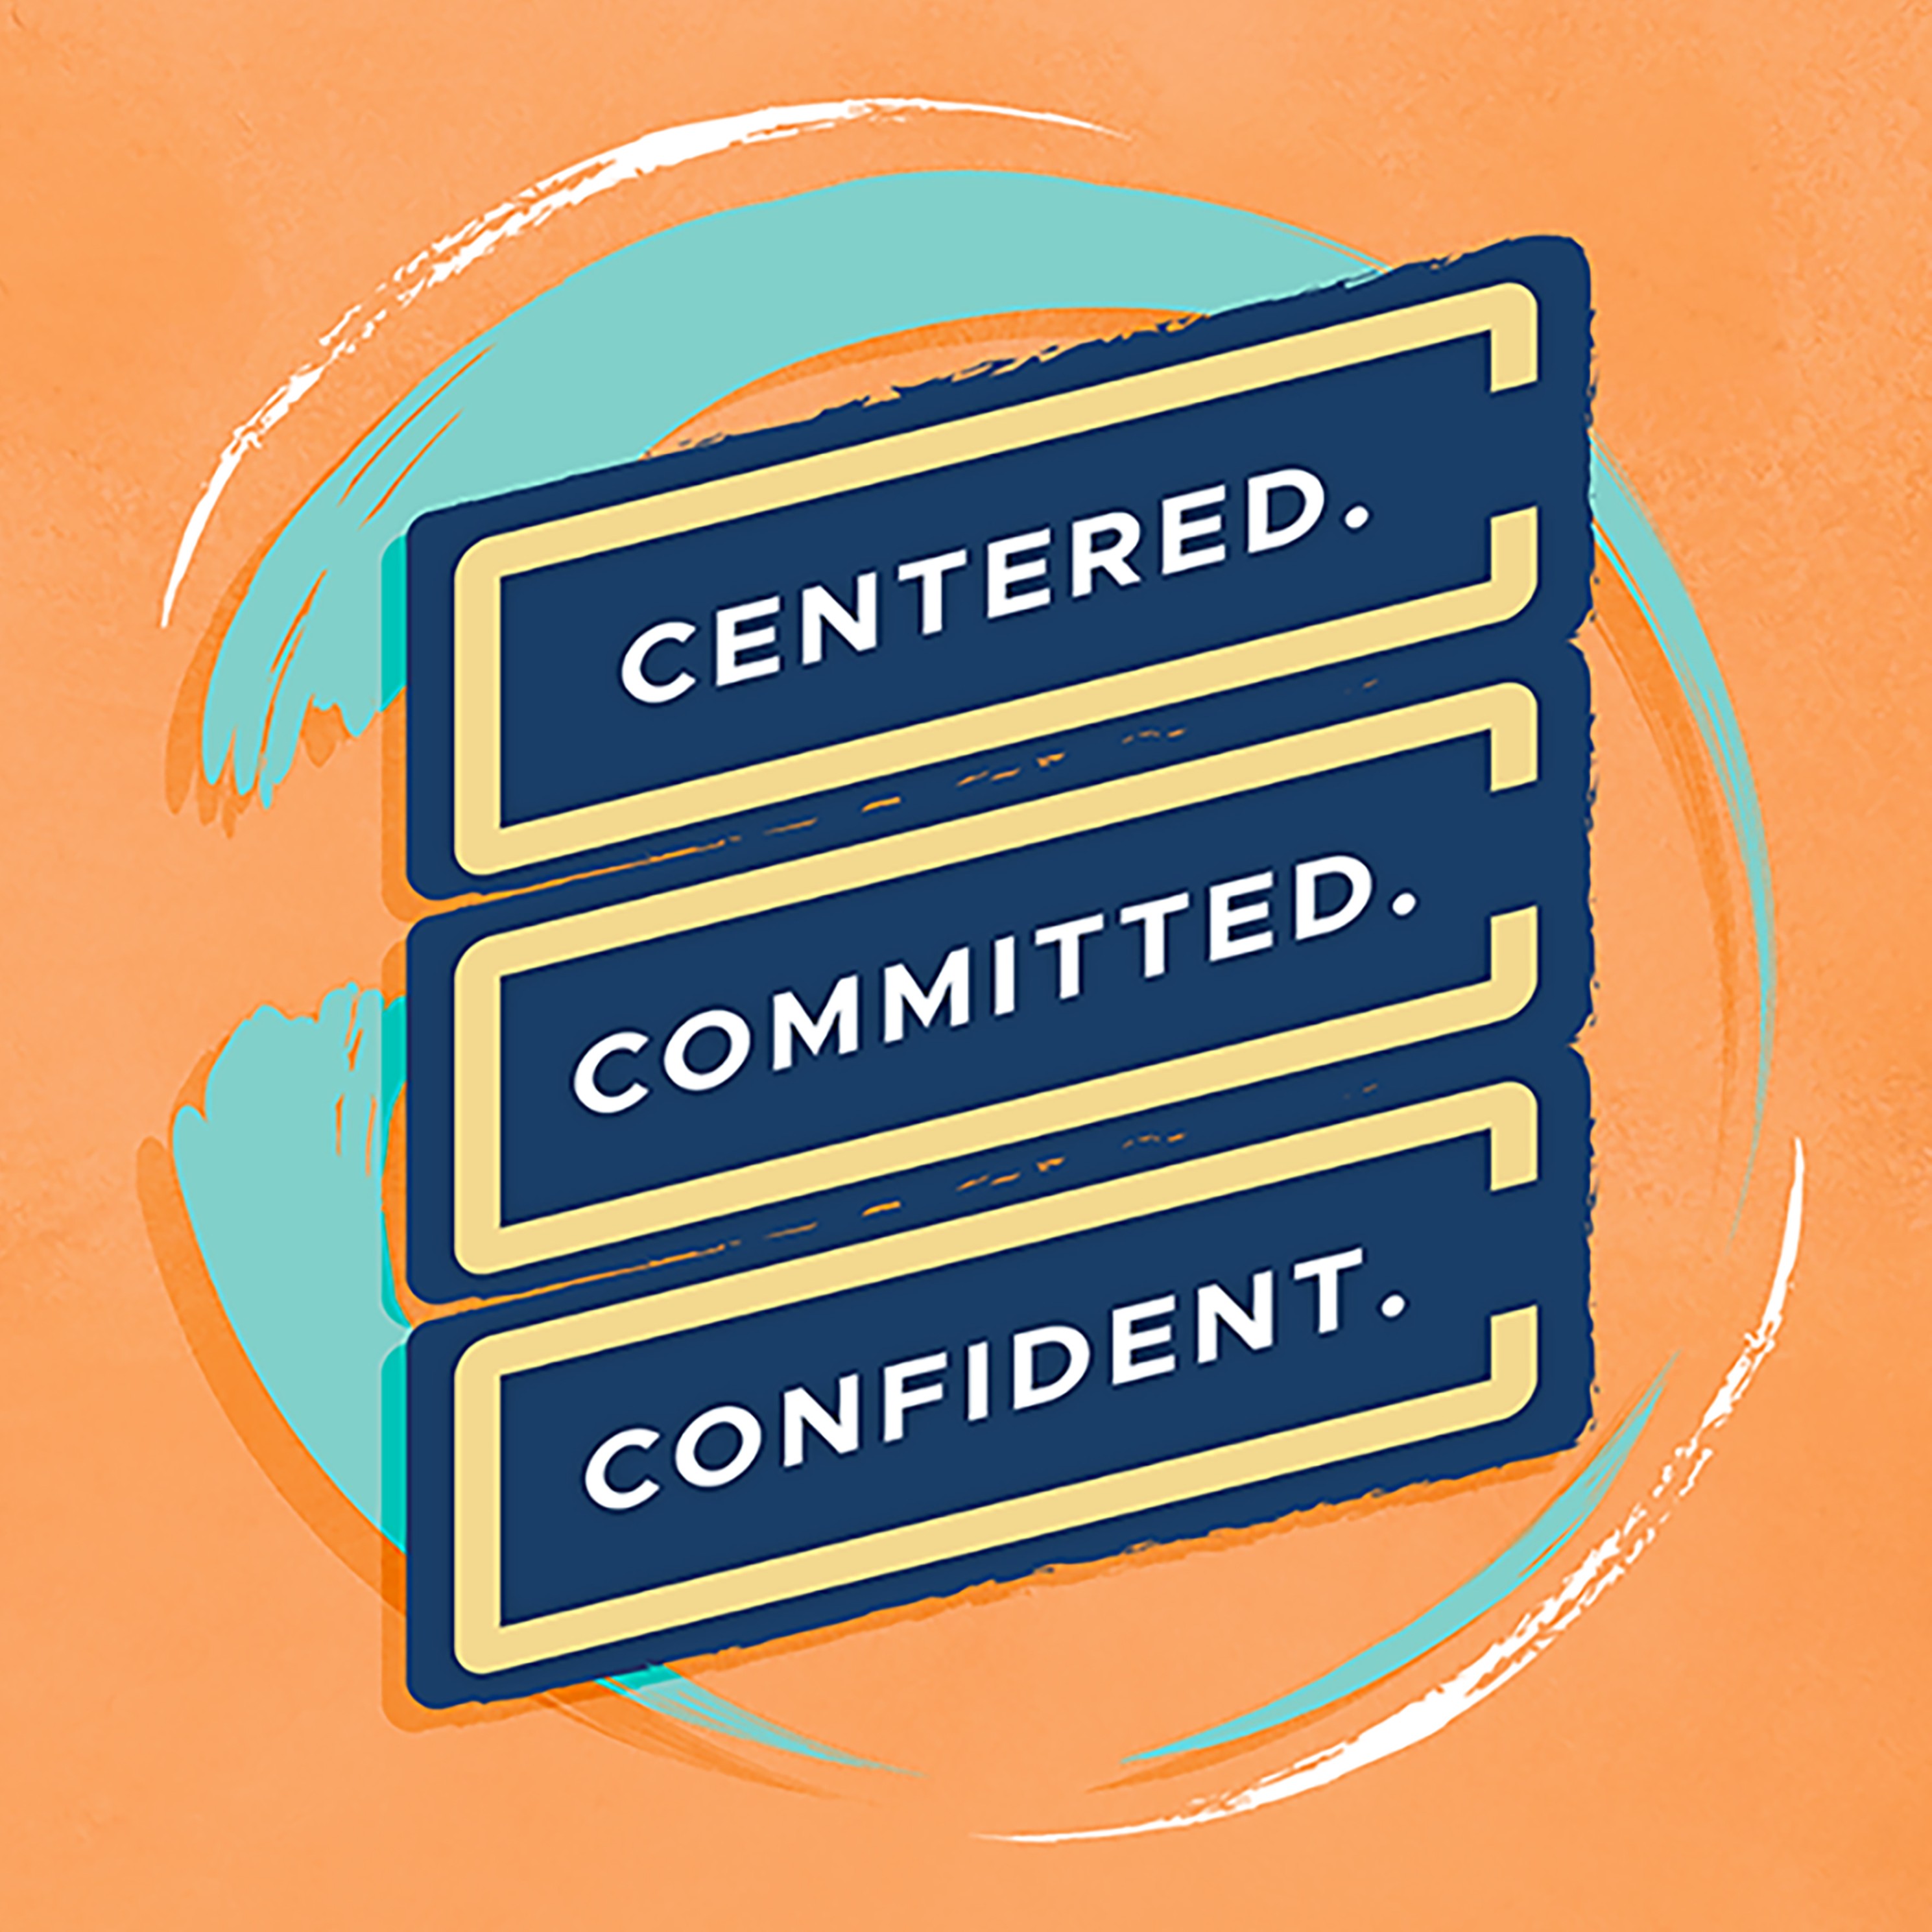 Centered | Committed | Confident